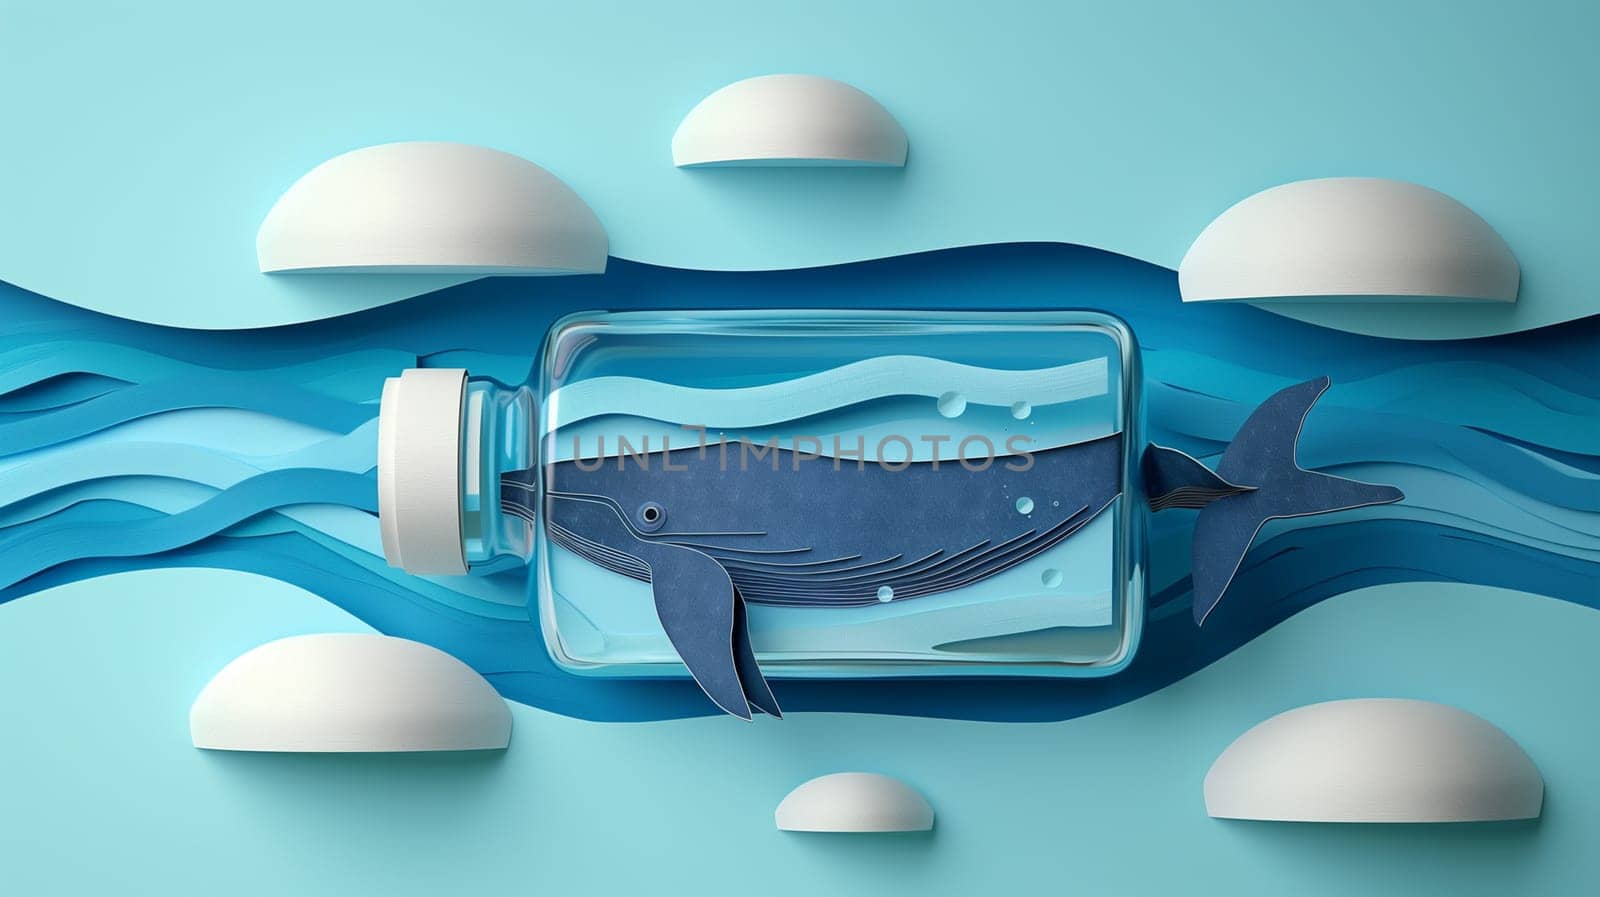 A whale is shown trapped inside a bottle against a backdrop of cloudy sky, illustrating the harmful effects of plastic pollution on marine life.